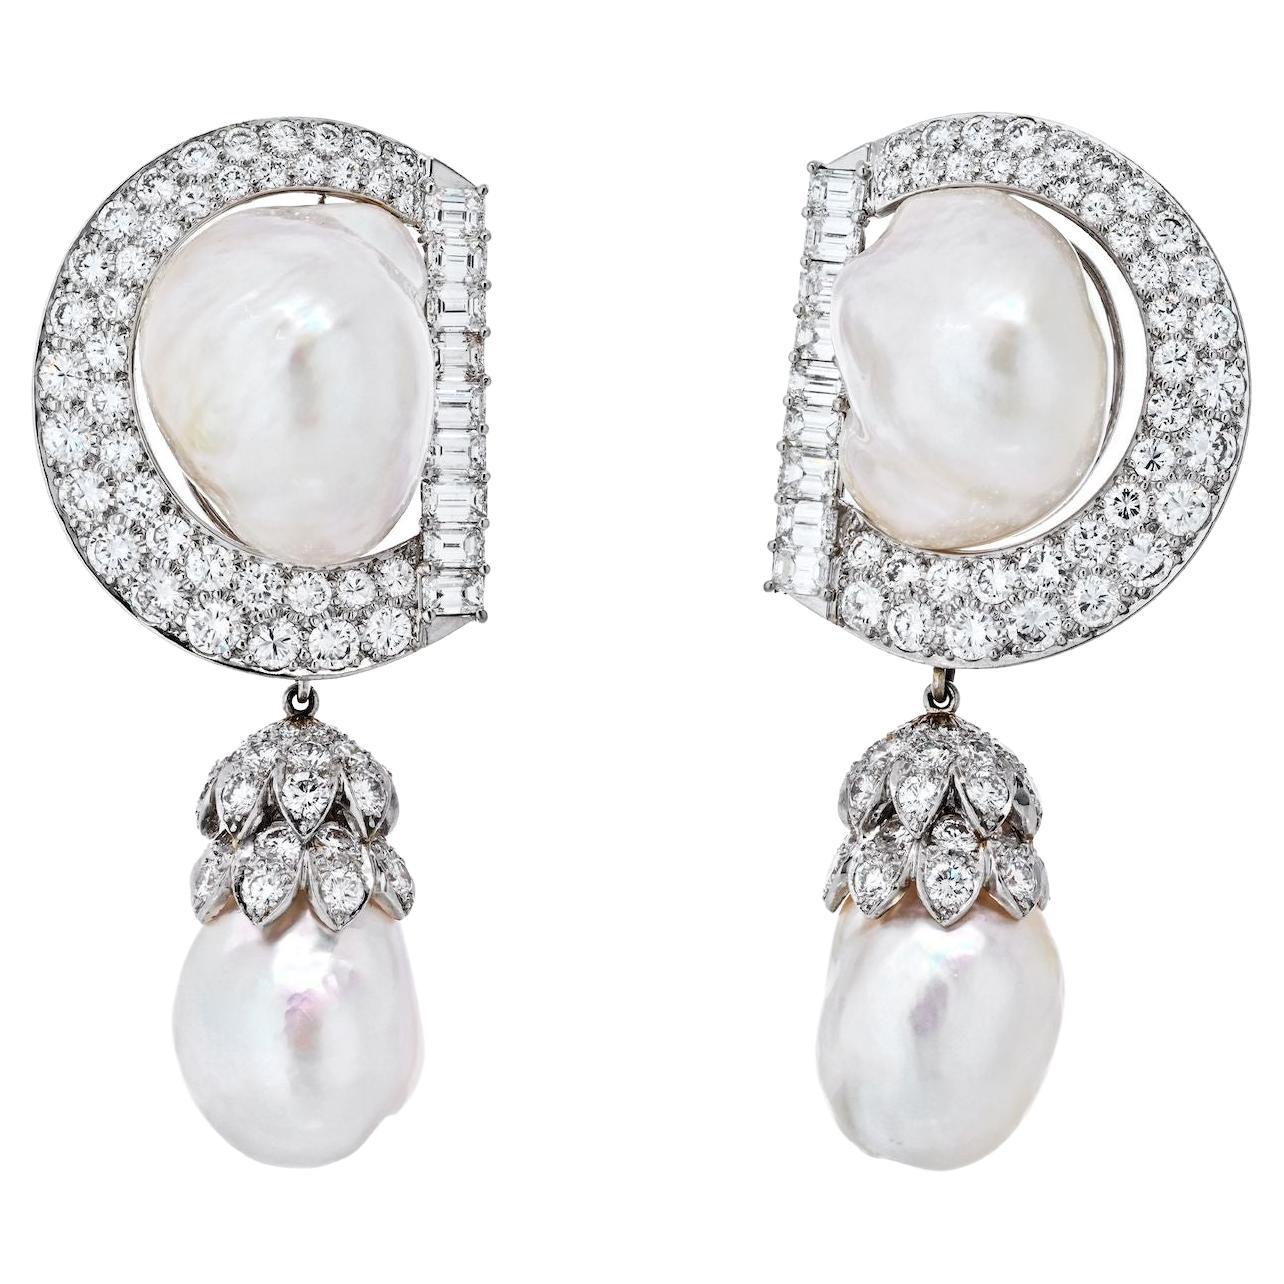 David Webb Platinum 9.92 Cttw Diamond and Pearl Day to Night Earrings For Sale